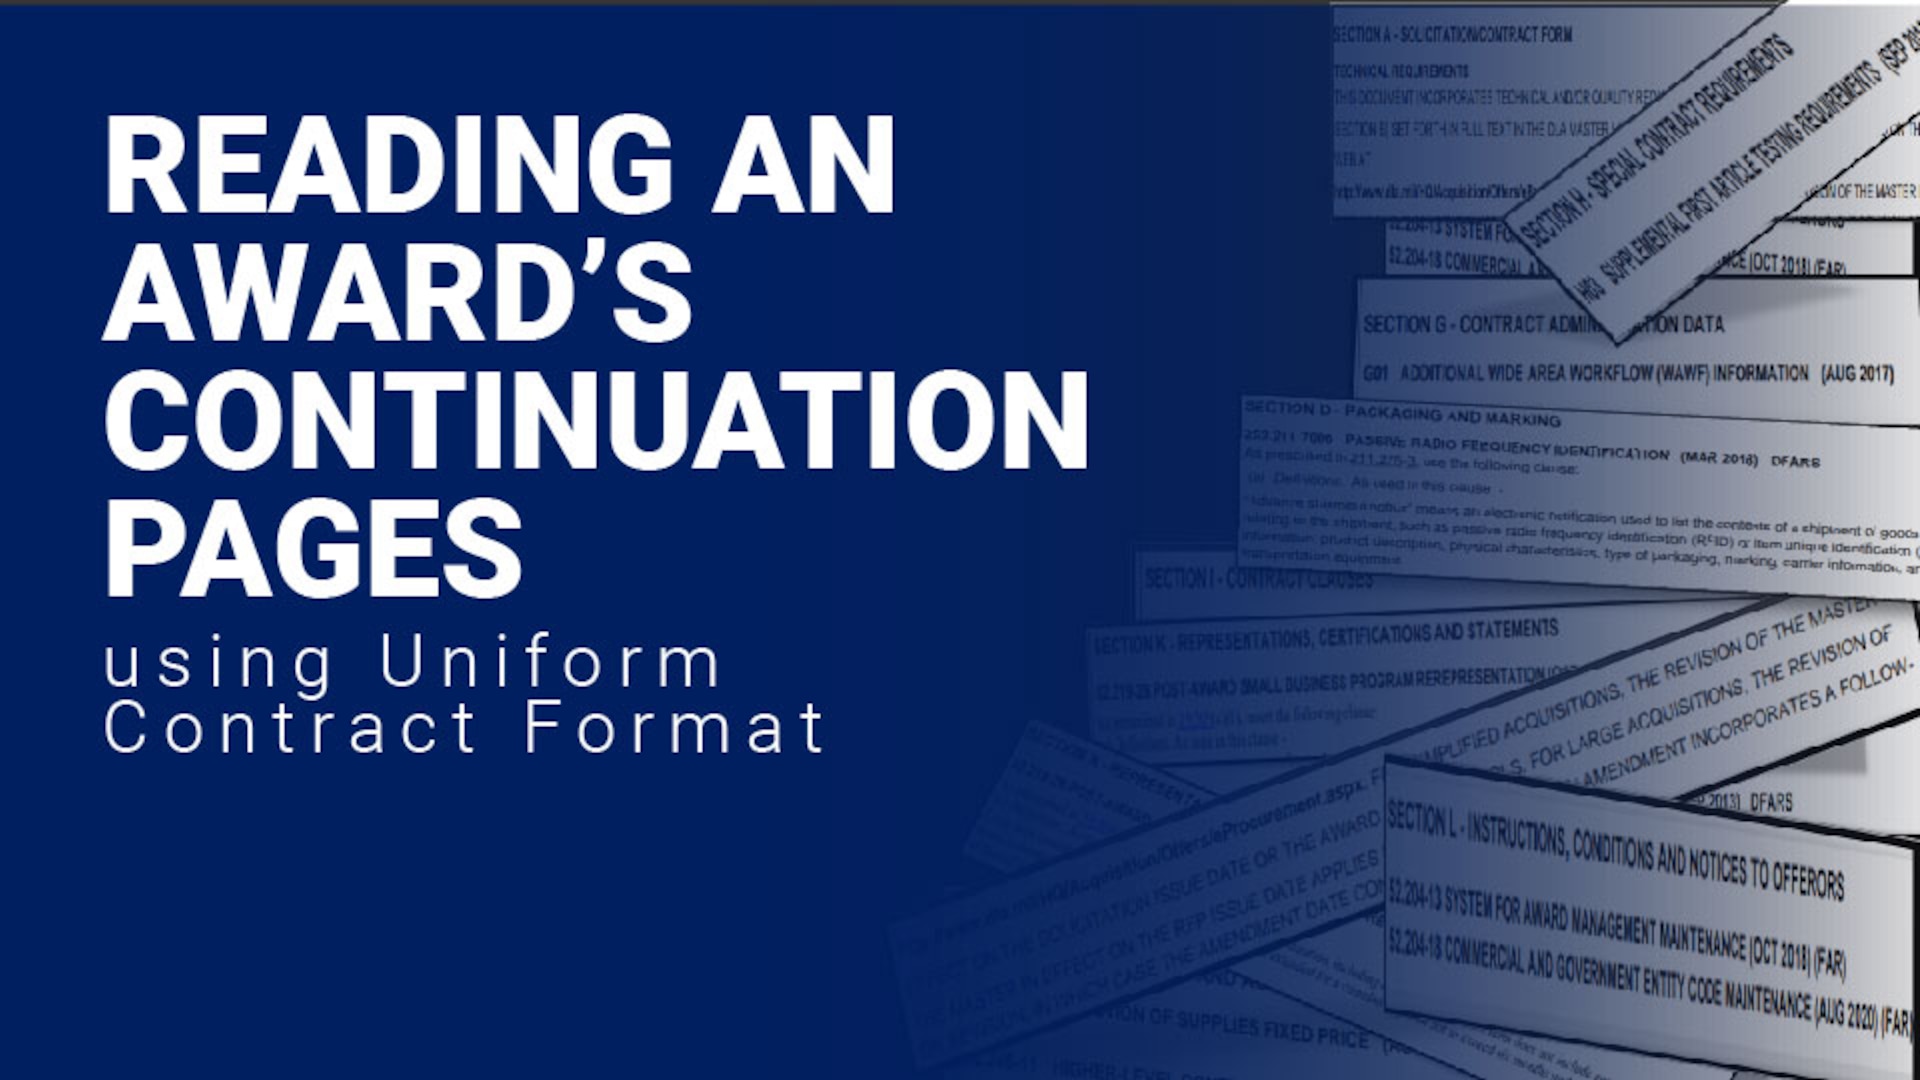 Reading an Award's Continuation Pages using Uniform Contract format with section examples A, B, C, D, E, F, G, H, I, J, K, L and M. See the following sections in article for equivalent information of image.